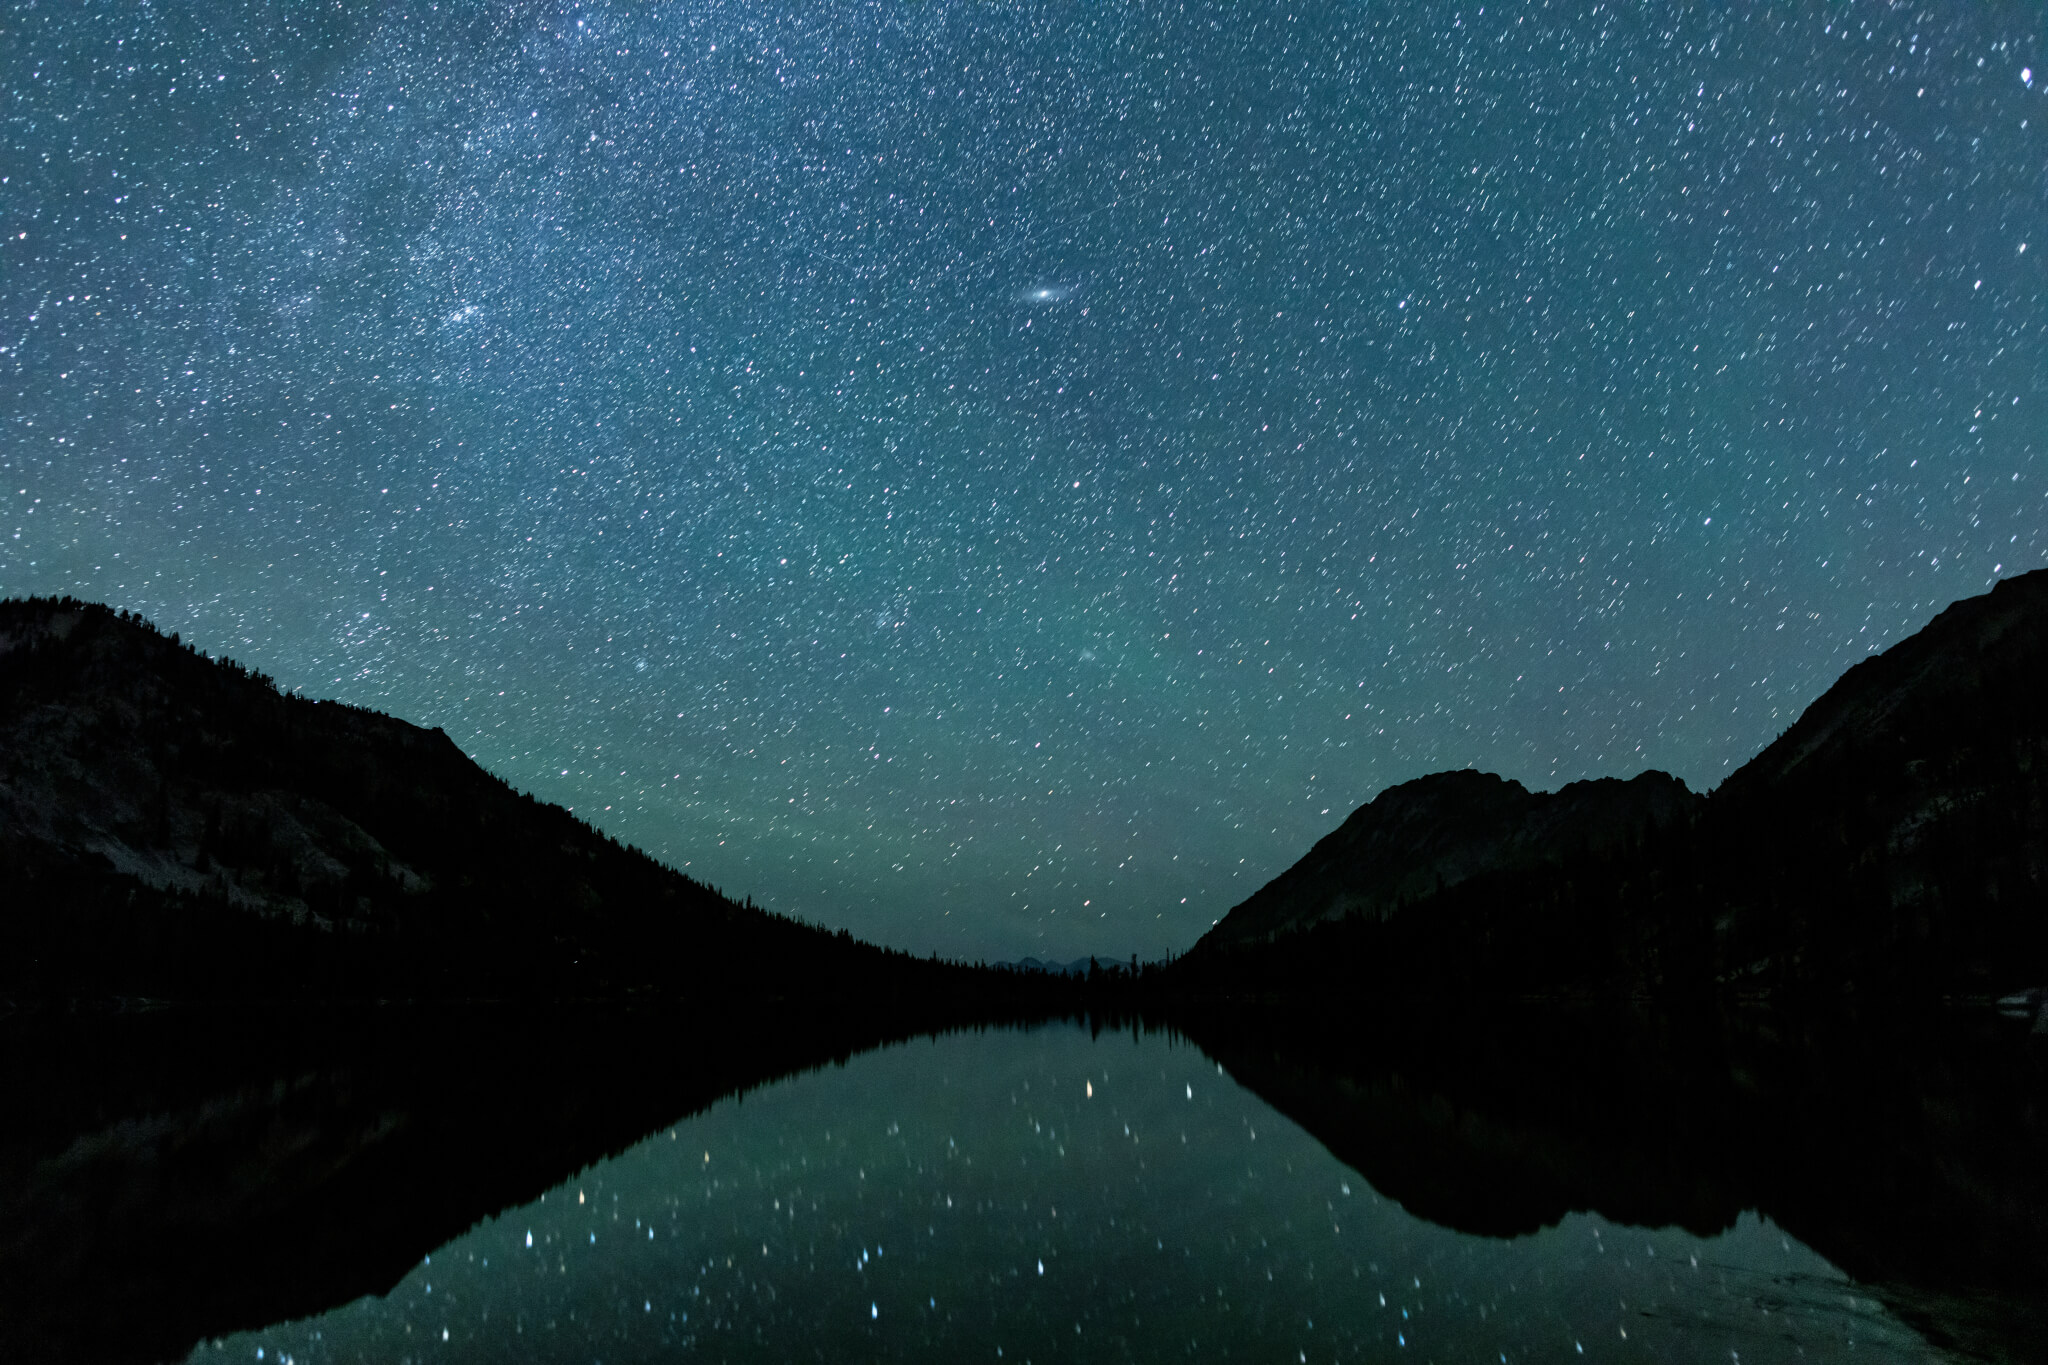 Toxaway Lake, located in Idaho’s Sawtooth Wilderness seen on a summer night with many stars in the sky and reflected in the water's surface.